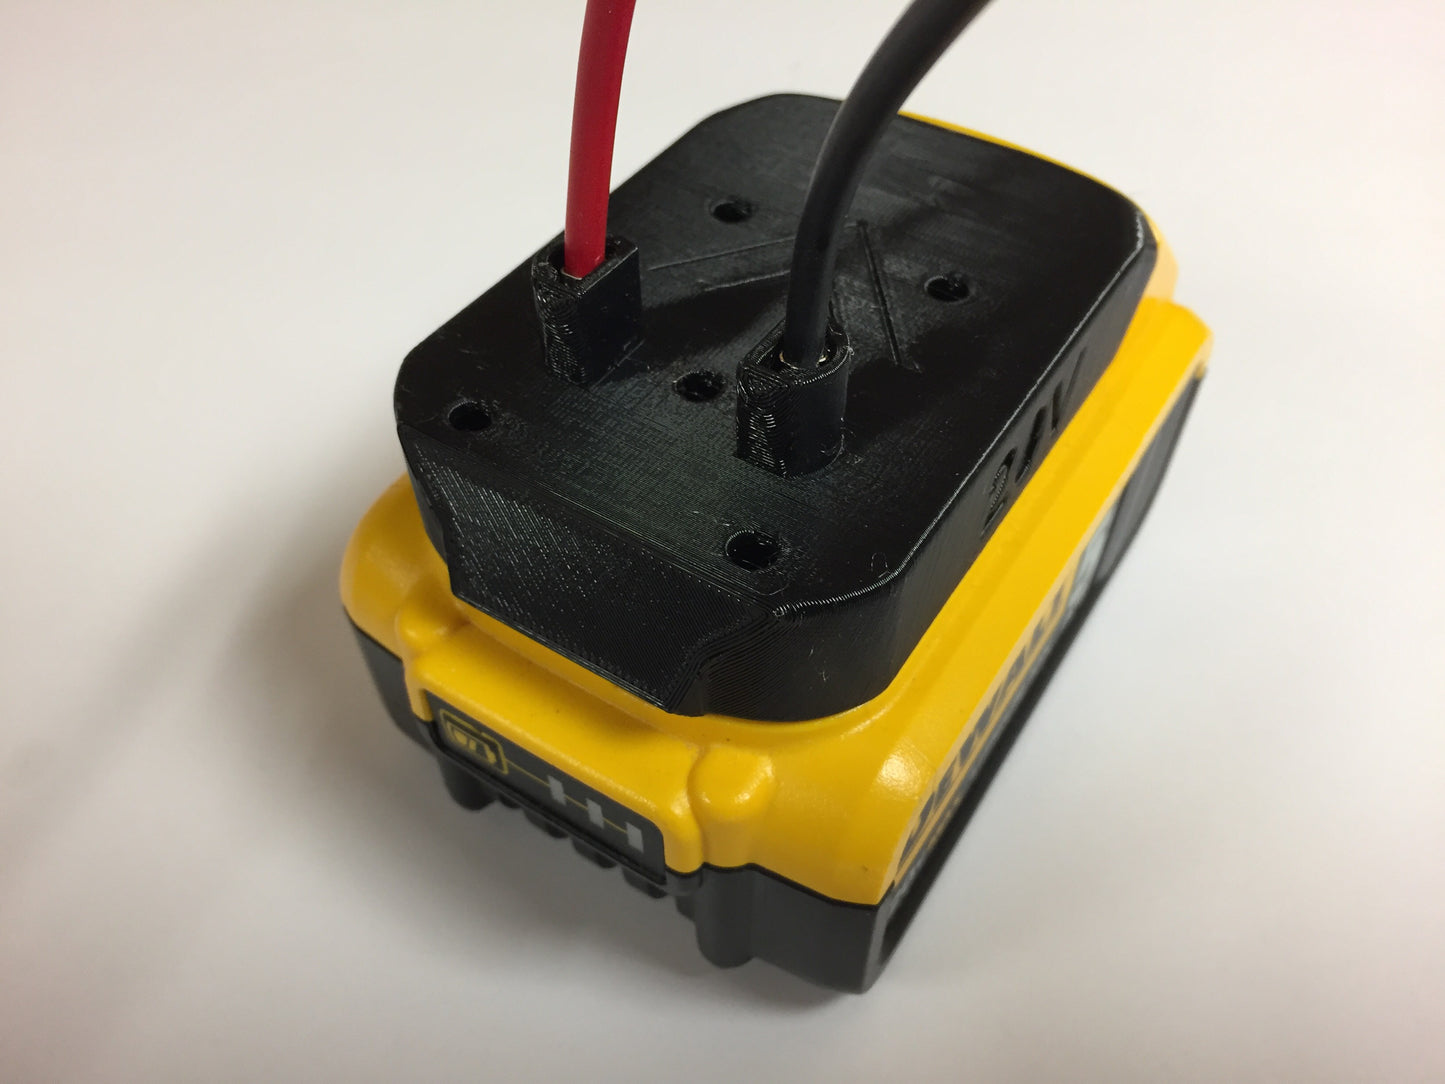 XT Right Angle adapter for Dewalt 20V MAX battery